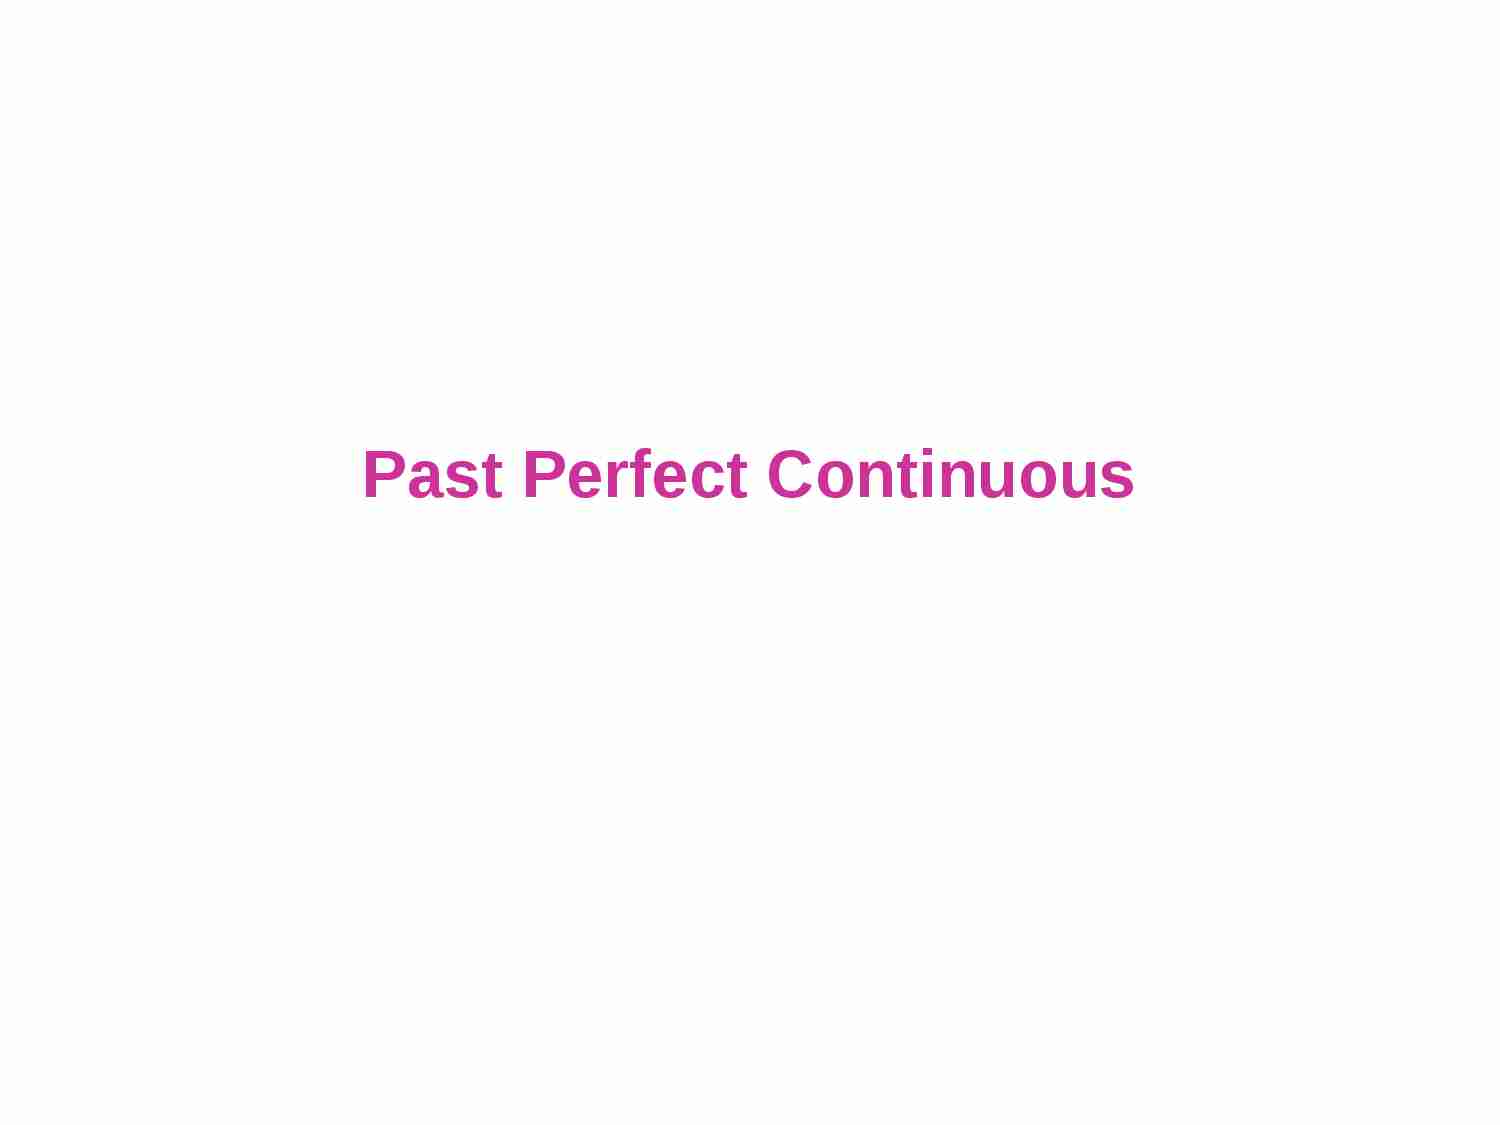 Past Perfect Continuous - strona 1